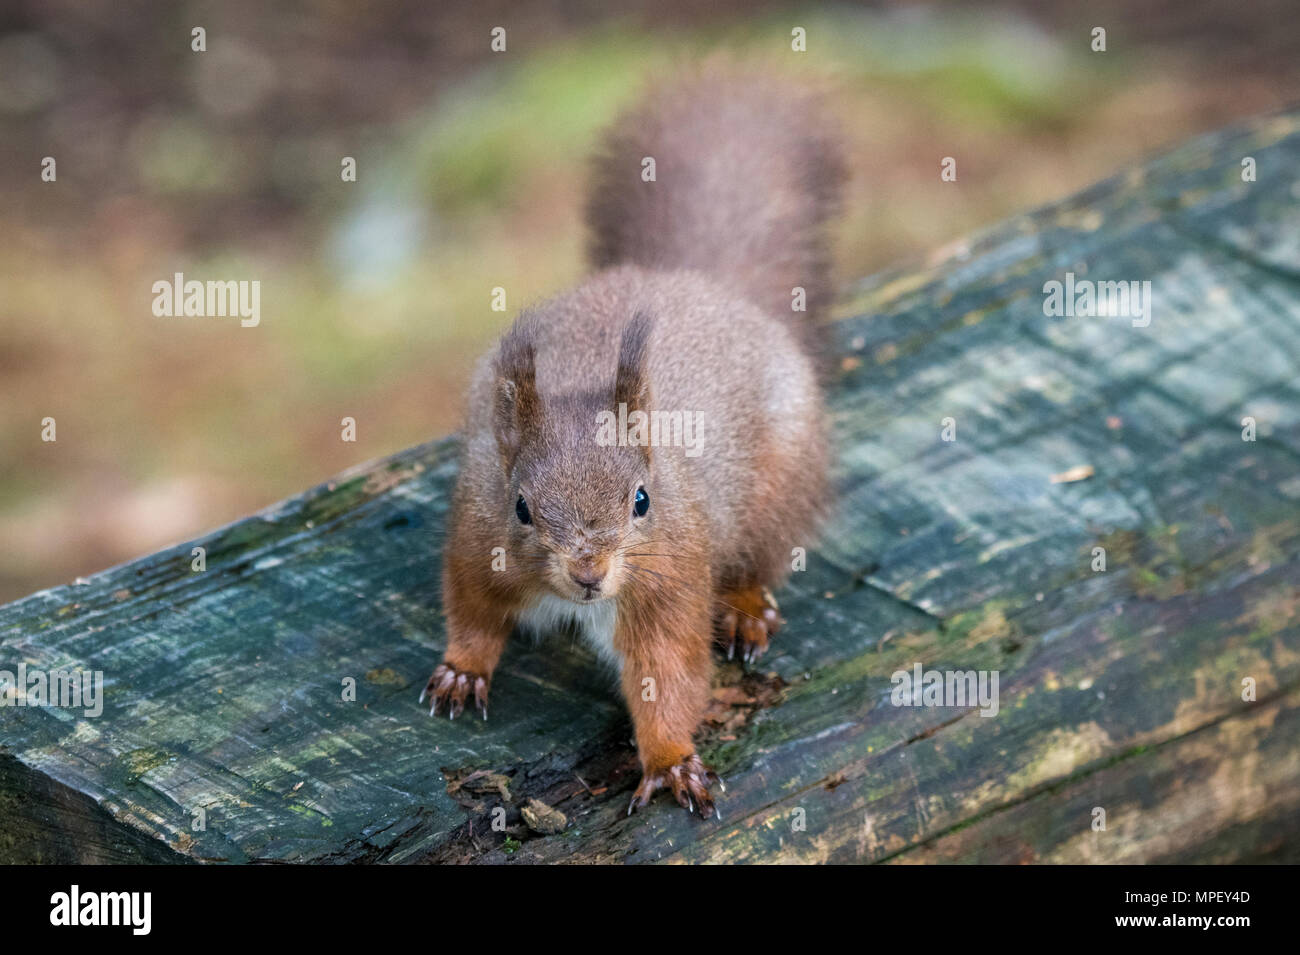 Single, cute red squirrel standing on wooden bench & cheekily looking up - Snaizeholme Red Squirrel Trail, near Hawes, Yorkshire Dales, England, UK. Stock Photo